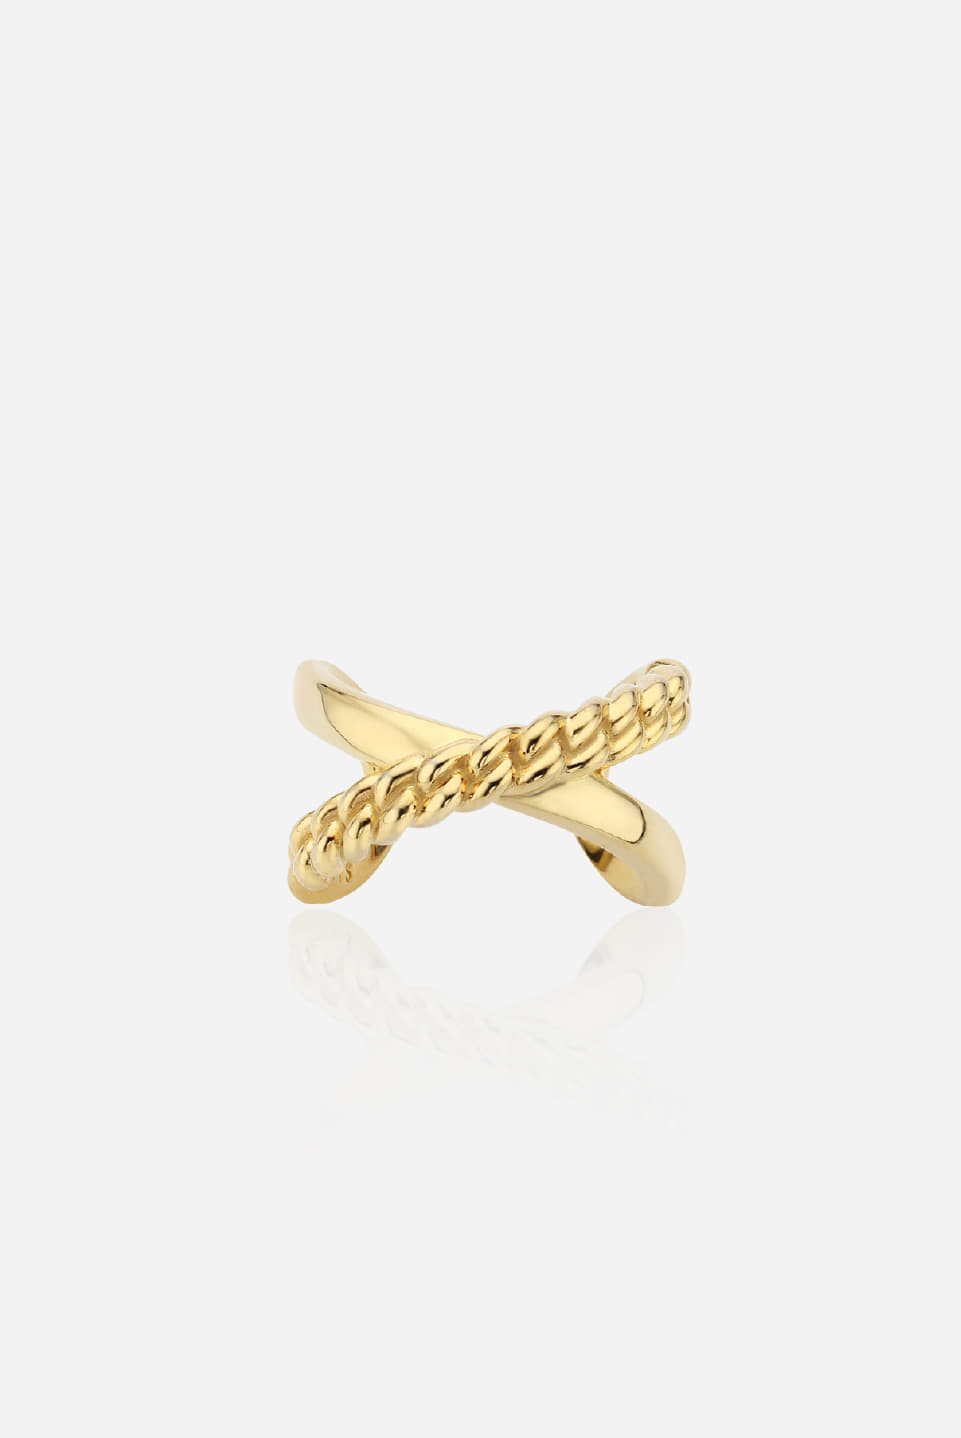 X Knot Chain Ring in Gold